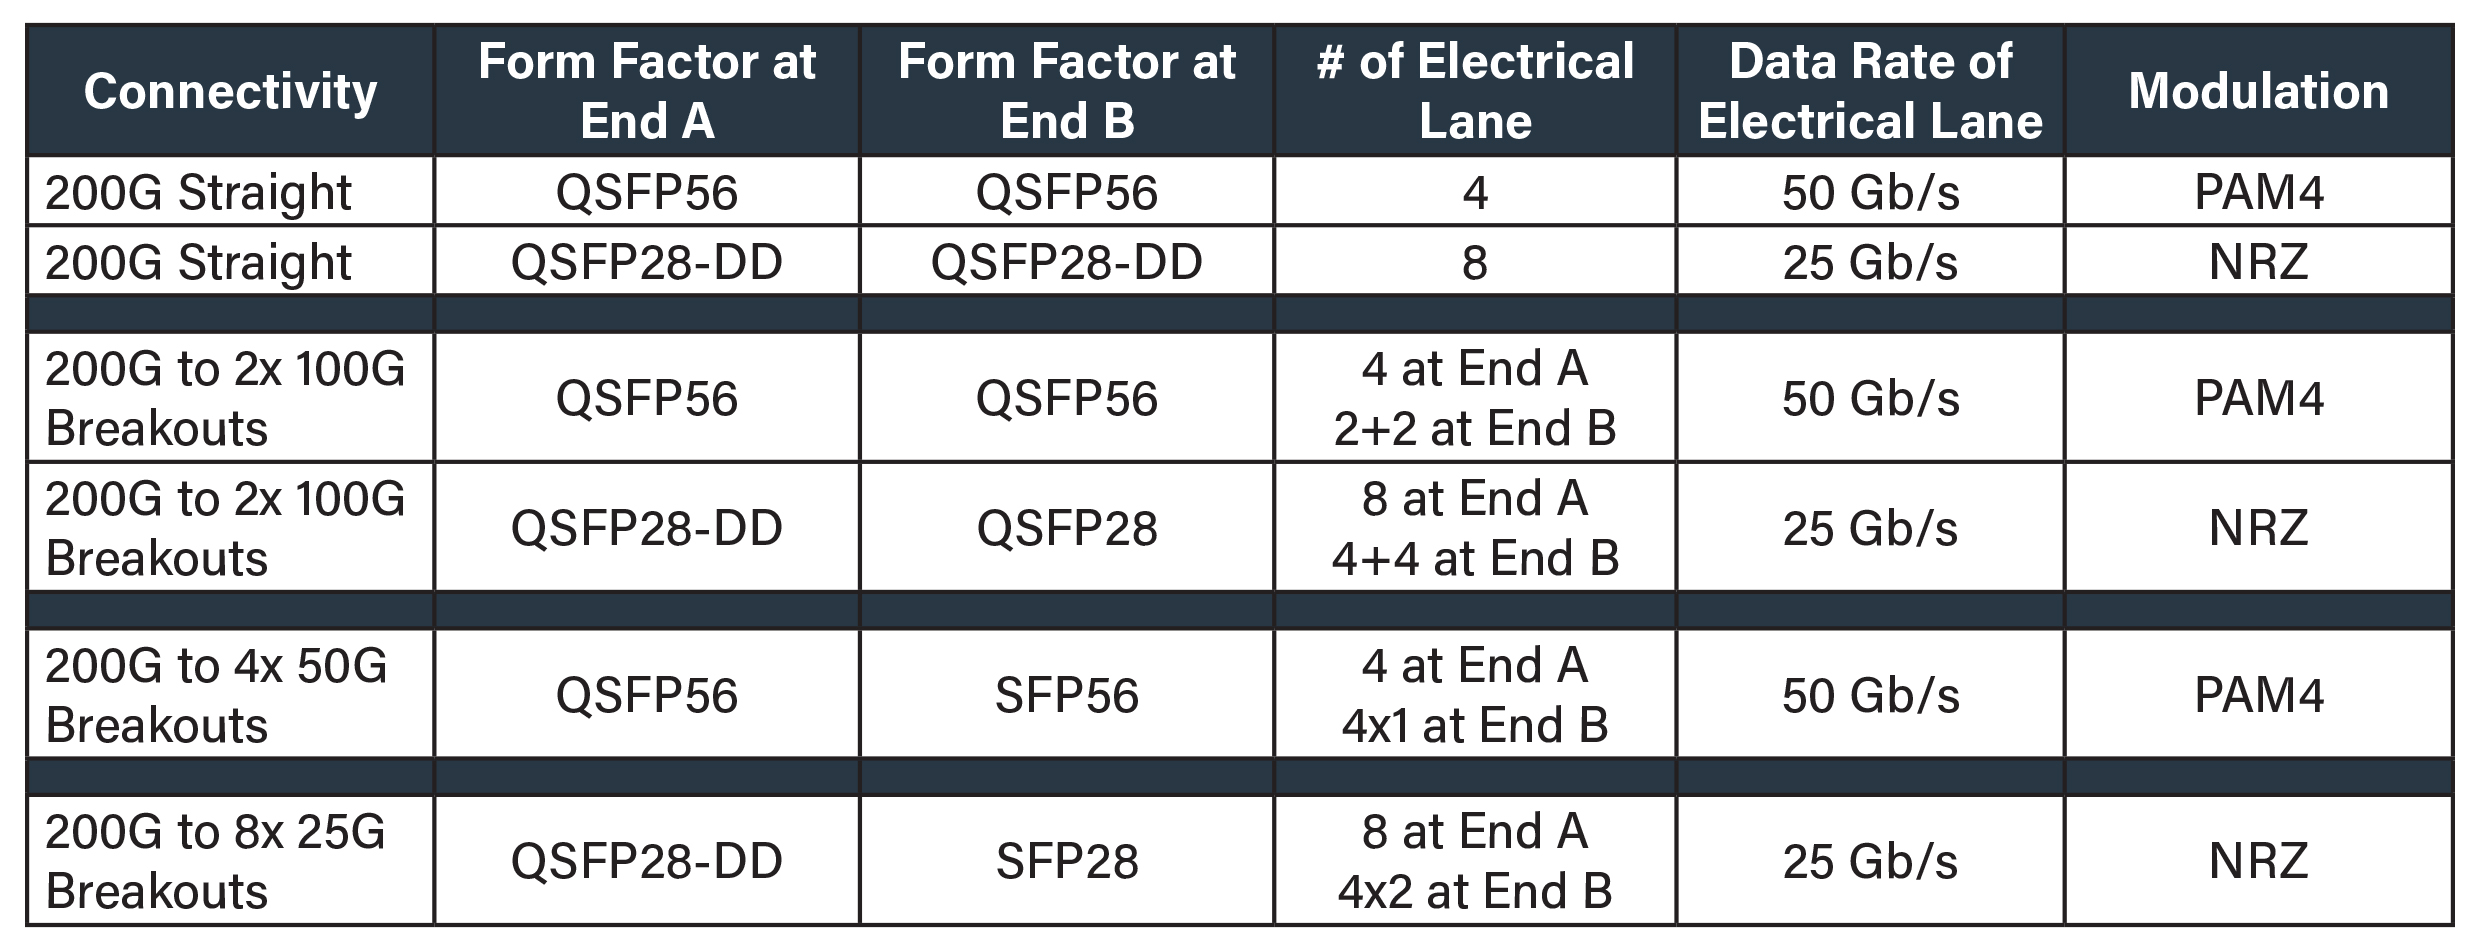 chart detailing form factors, electrical lanes and modulation for 200G fiber optic transceivers.